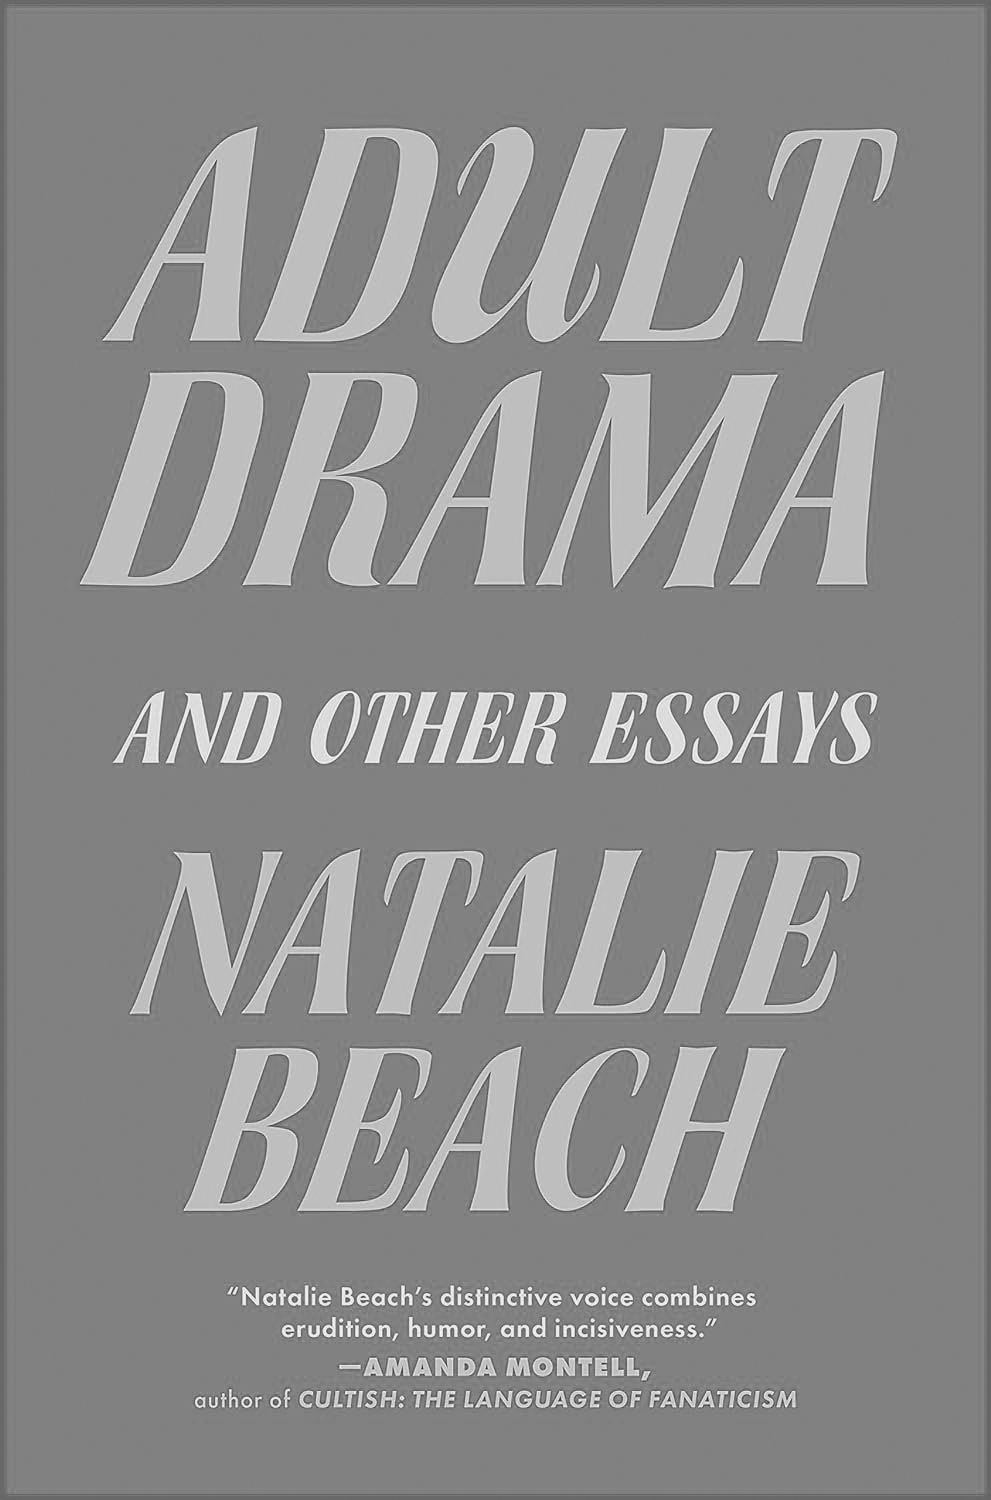 Adult Drama: And Other Essays